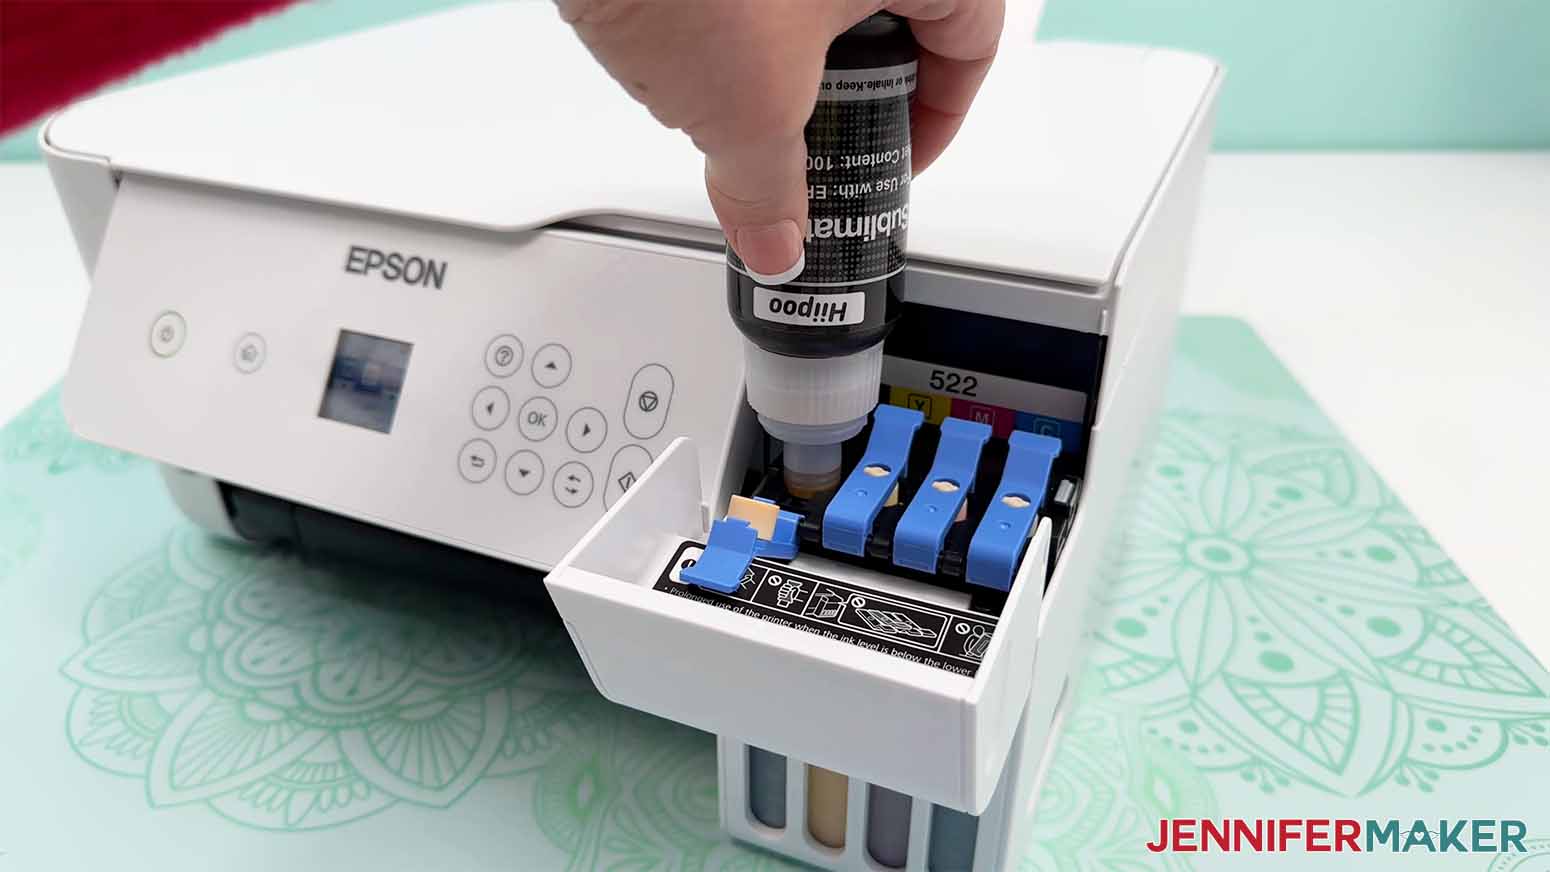 If one or more reservoir is close to the minimum level, add more ink now. Running these resource-heavy processes without enough ink can damage the printer or give you unreliable results.